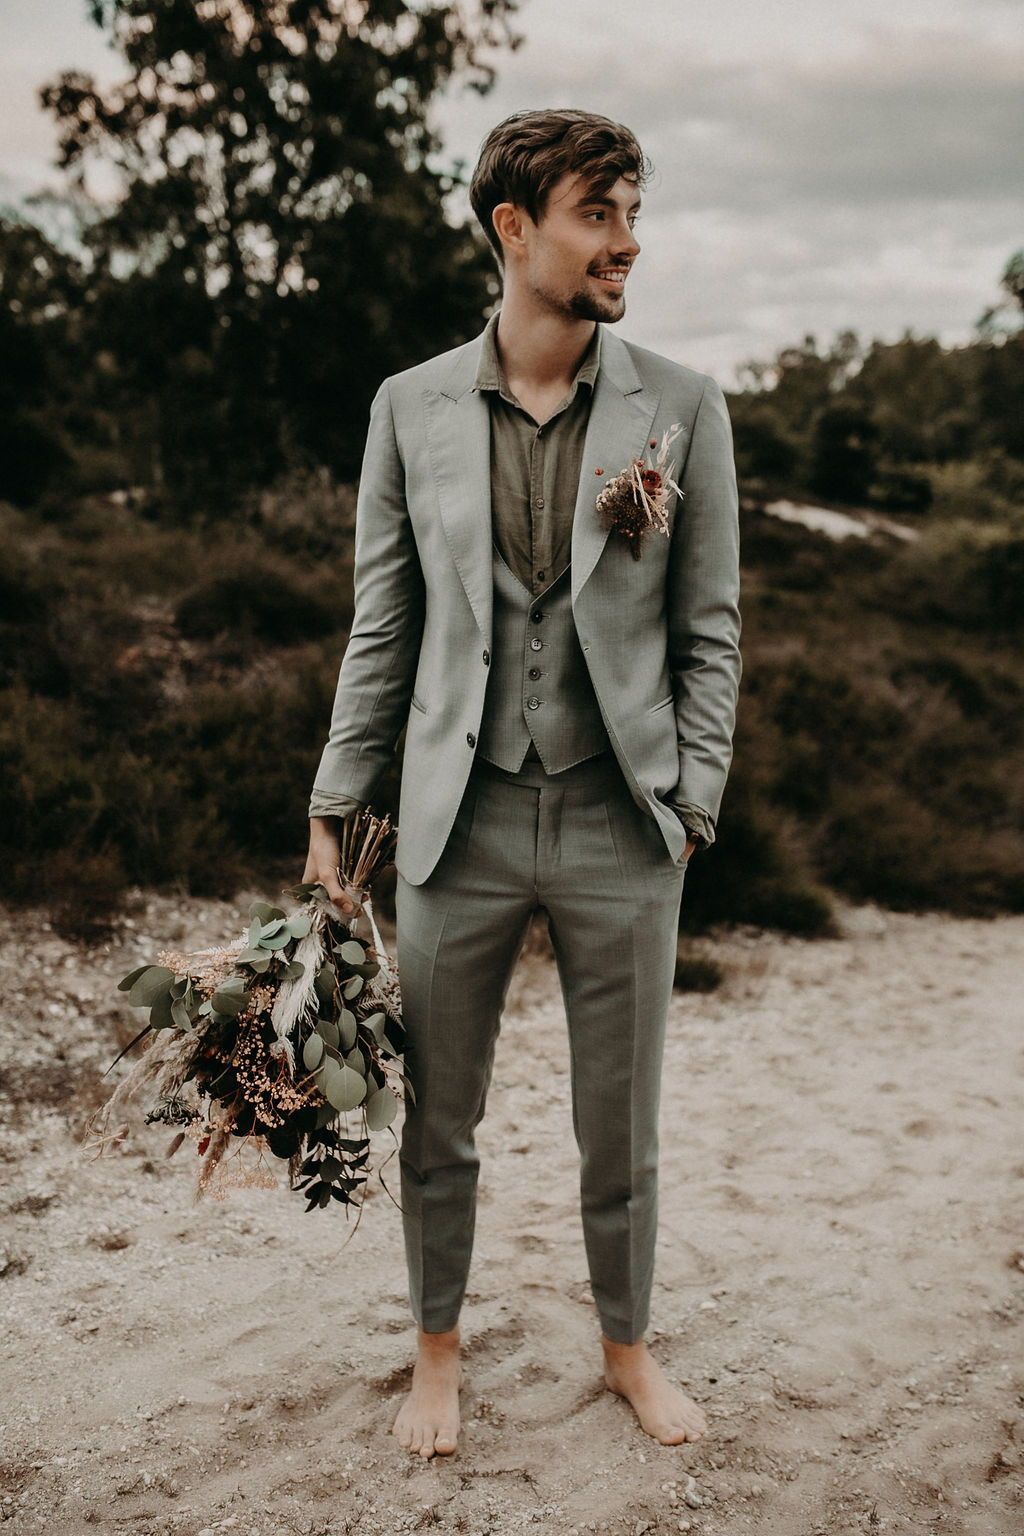 Wedding Suits For Men Selecting The Most
  Handsome Attire